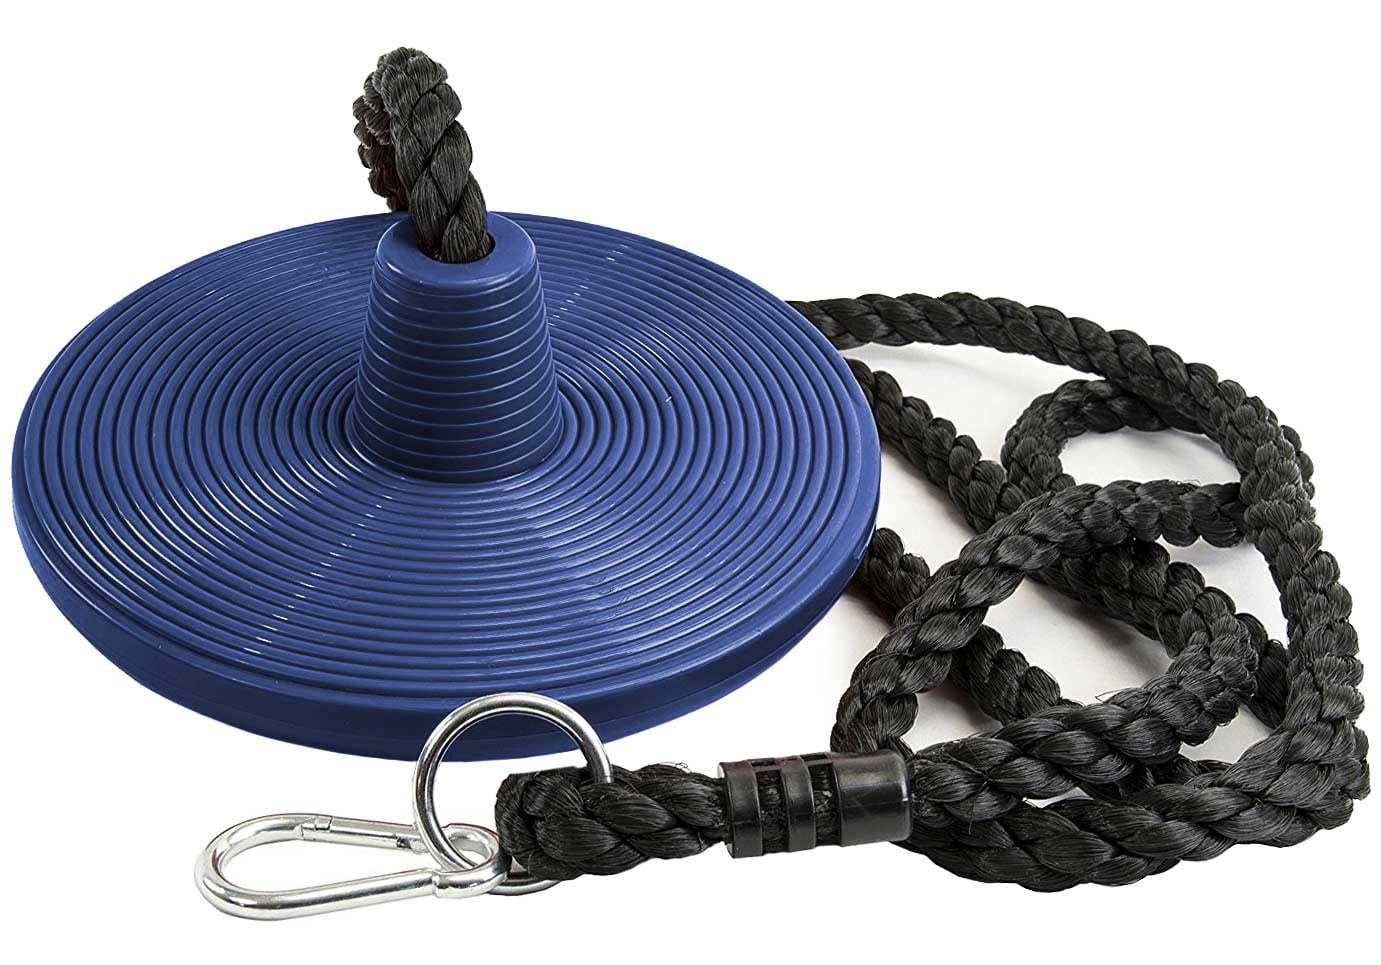 Squirrel Products Tree Swing Disc Rope Swing with Leg Safety Protector & 1 Heavy Duty Rope 